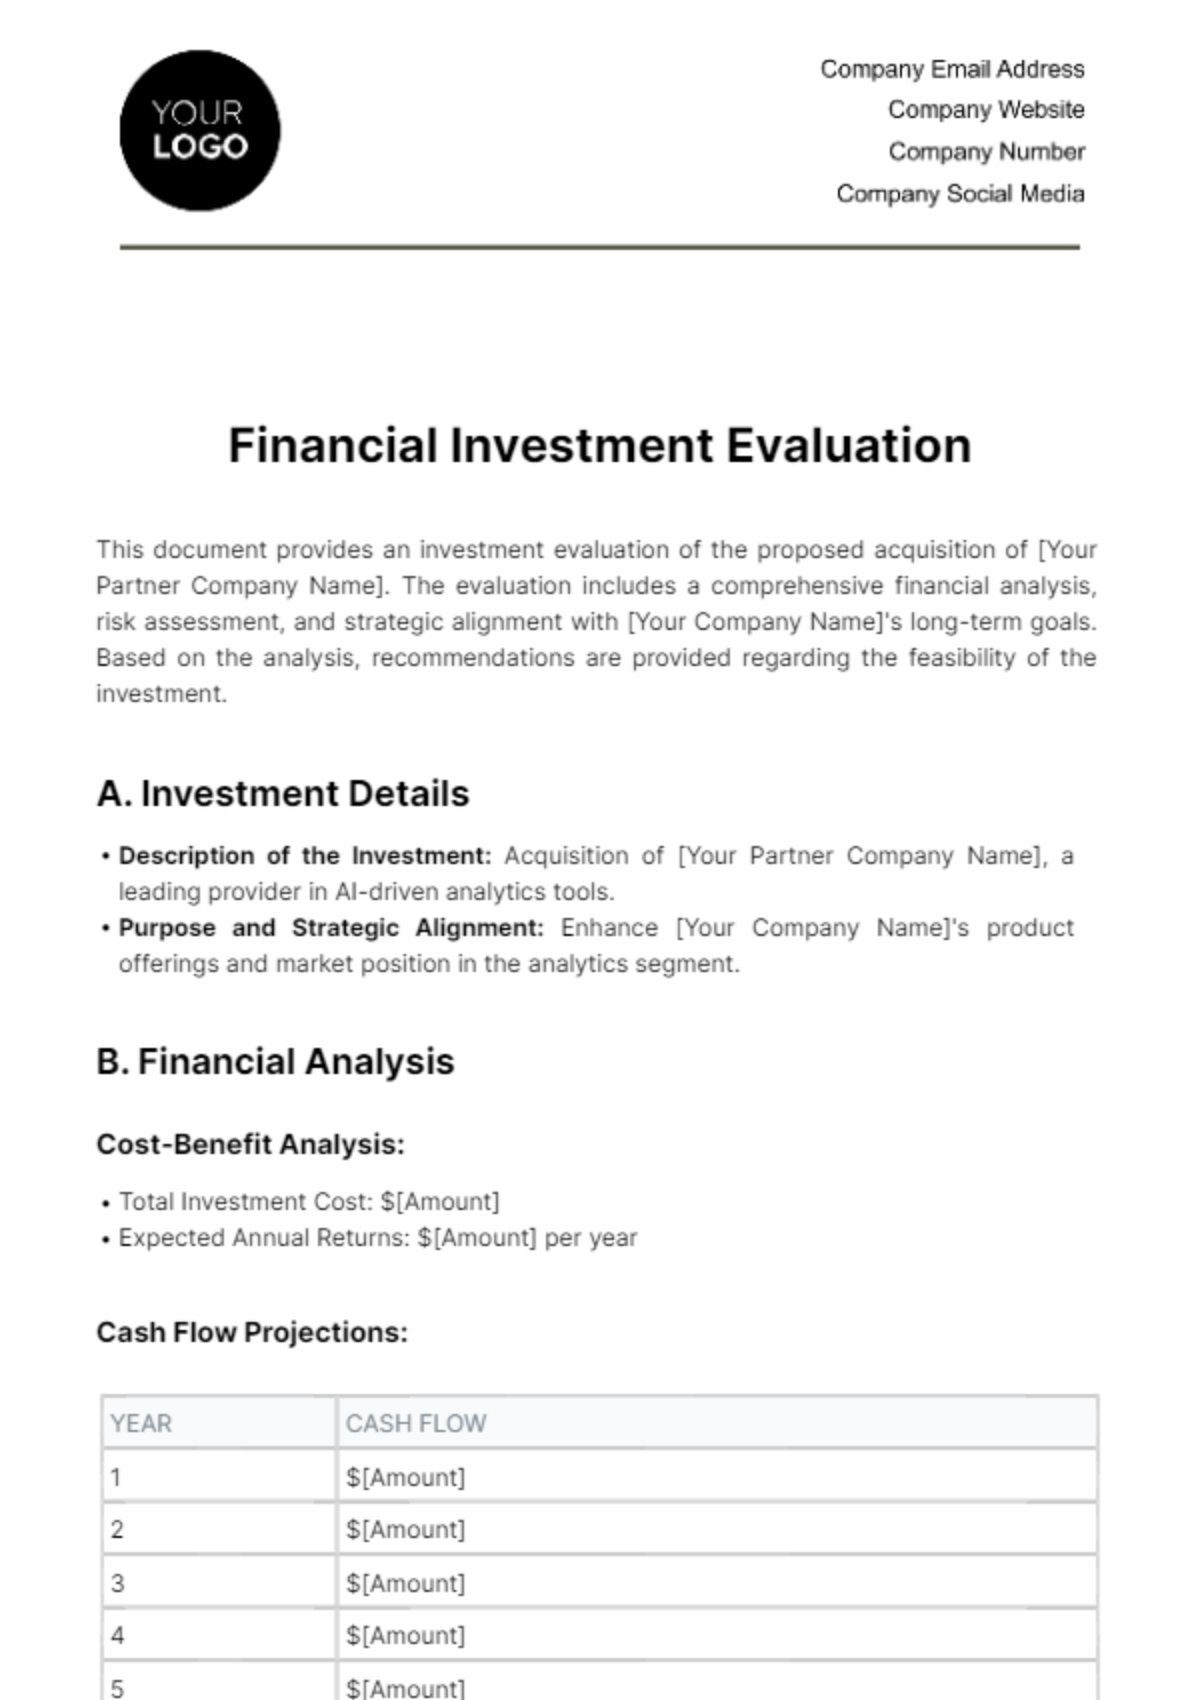 Financial Investment Evaluation Template